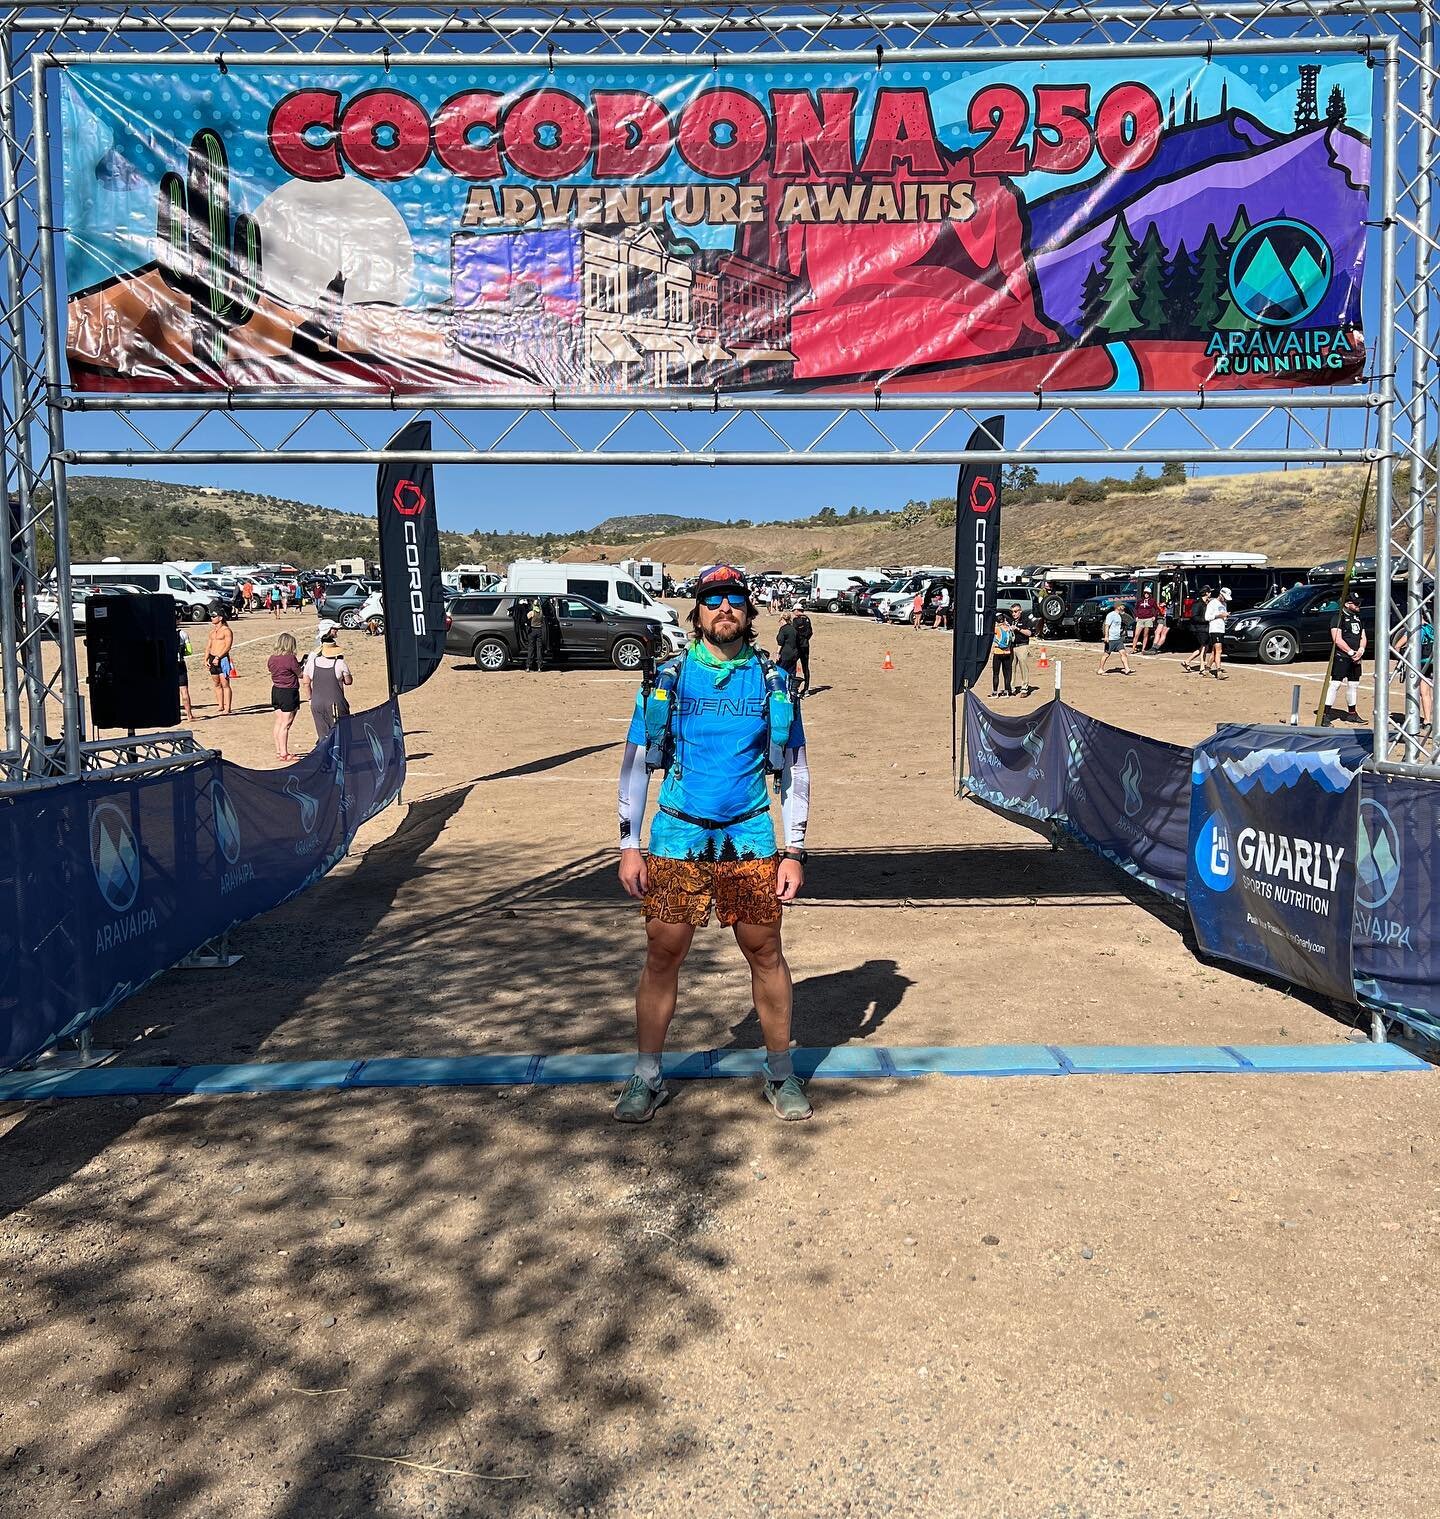 The Journey begins! 🏜⛰🌵Follow along at cocodona.com/live 🏃🏻BIB 120! See you out there!